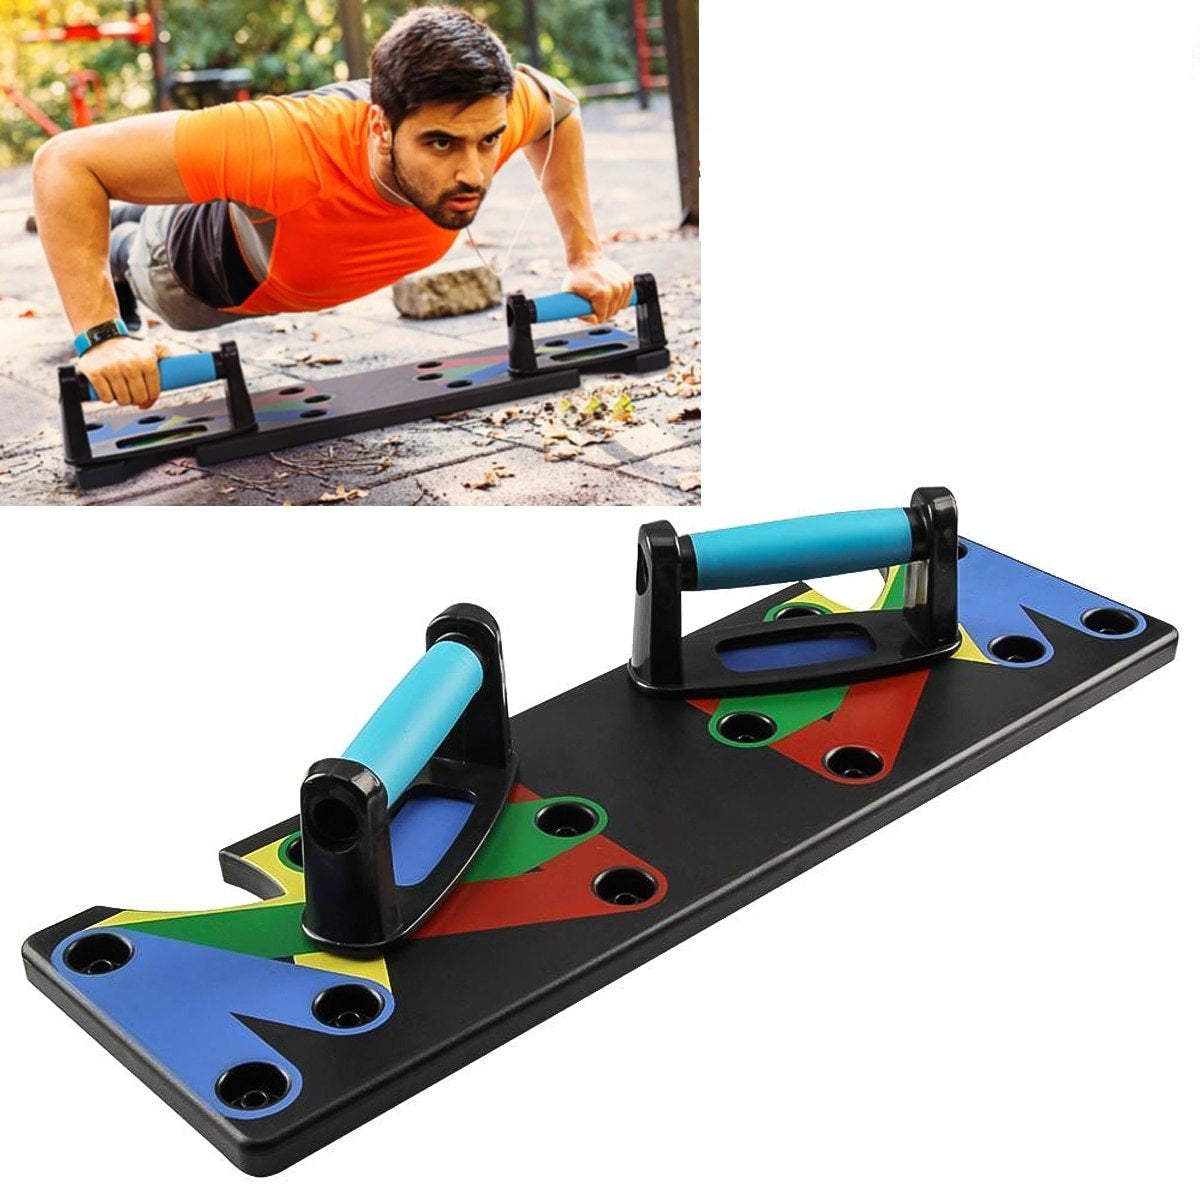 9 In 1 Push Up Rack Board Men Women Comprehensive Fitness Exercise Push Up Stands Body Building Training System Home Equipment|Push-Ups Stands|